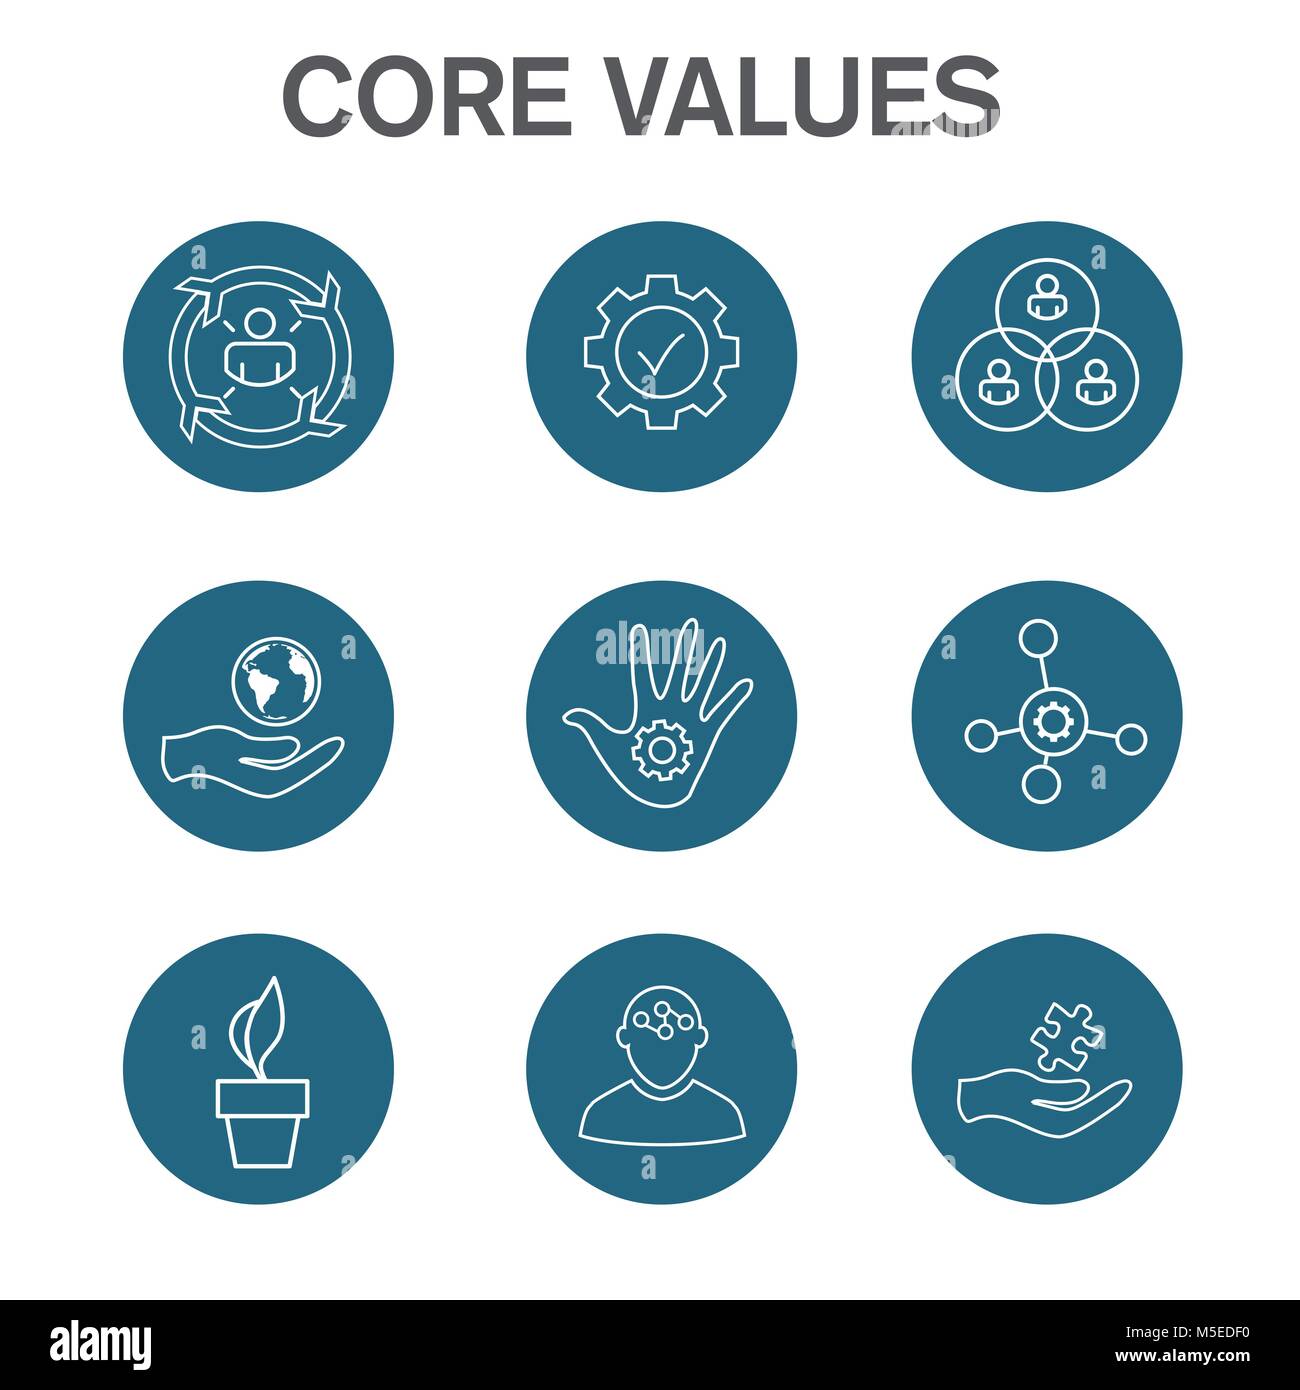 There Will Be a Greater Emphasis on Core Values and Social Responsibility